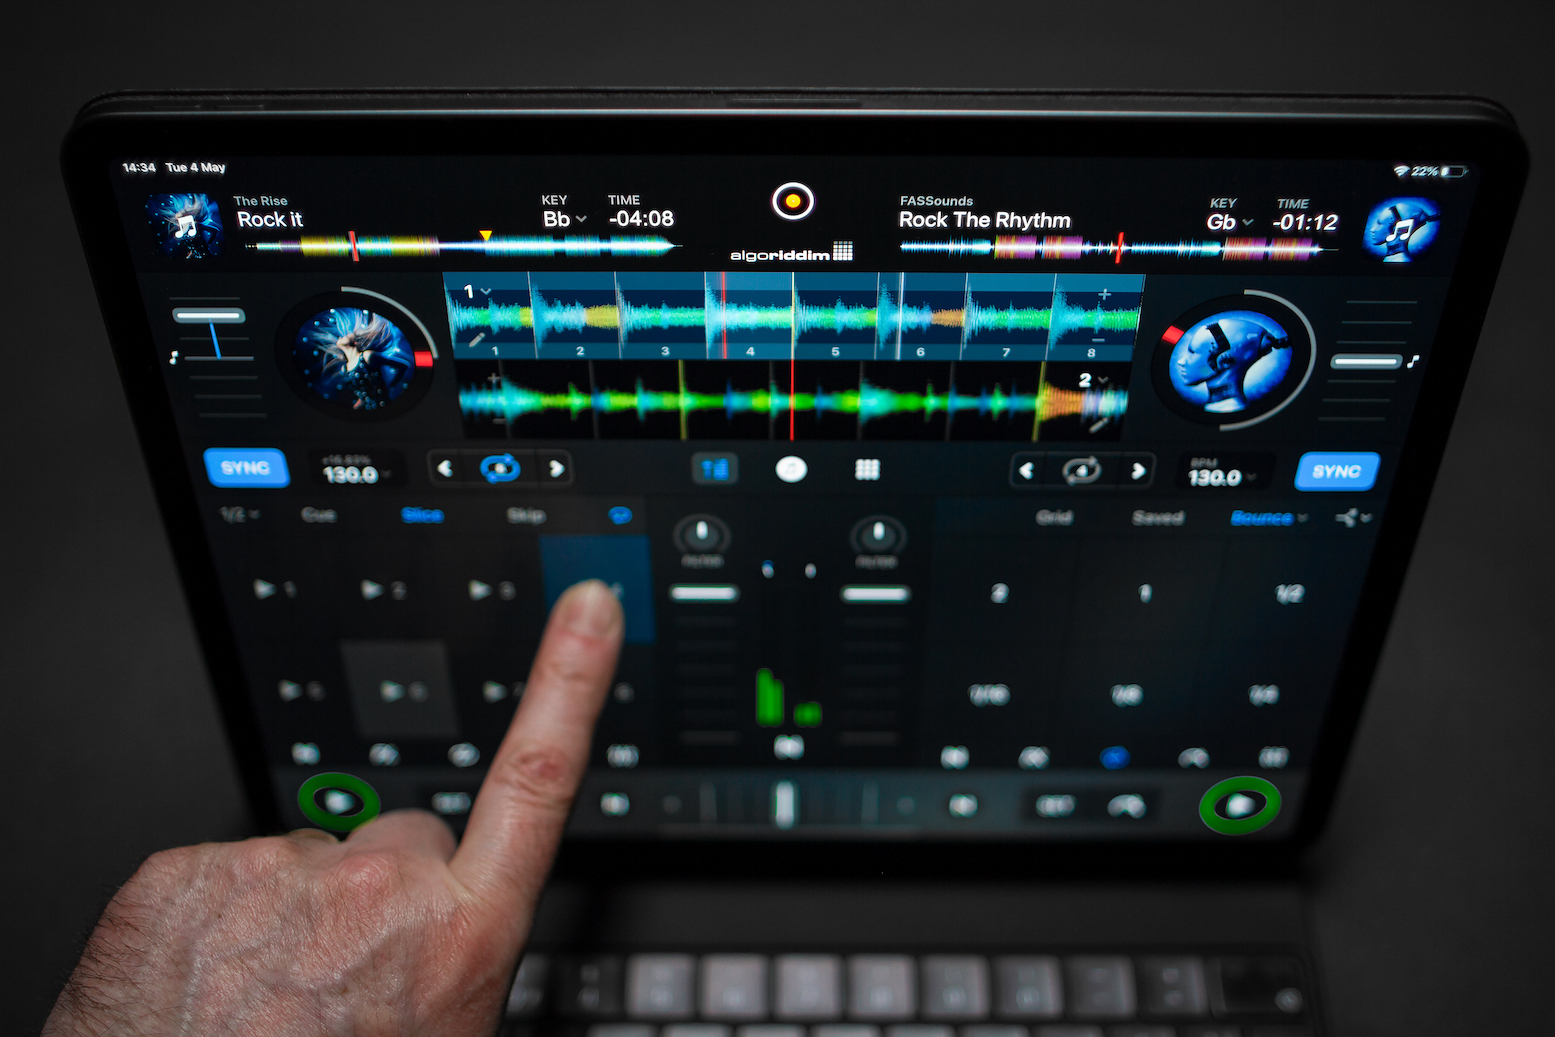 djay Pro AI for apple download